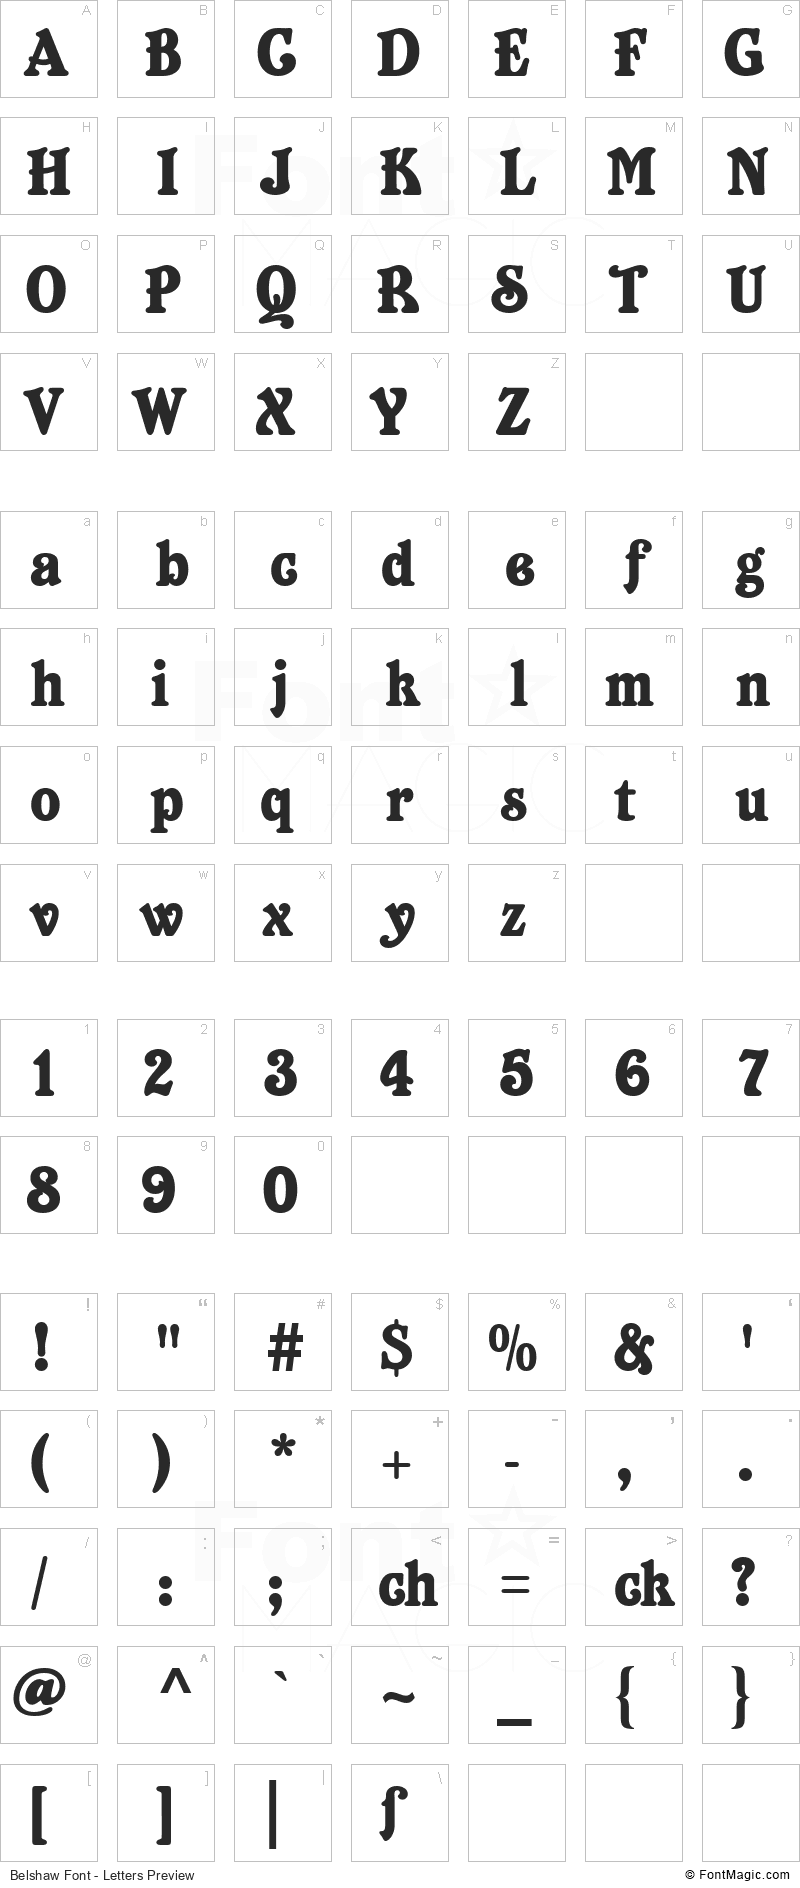 Belshaw Font - All Latters Preview Chart